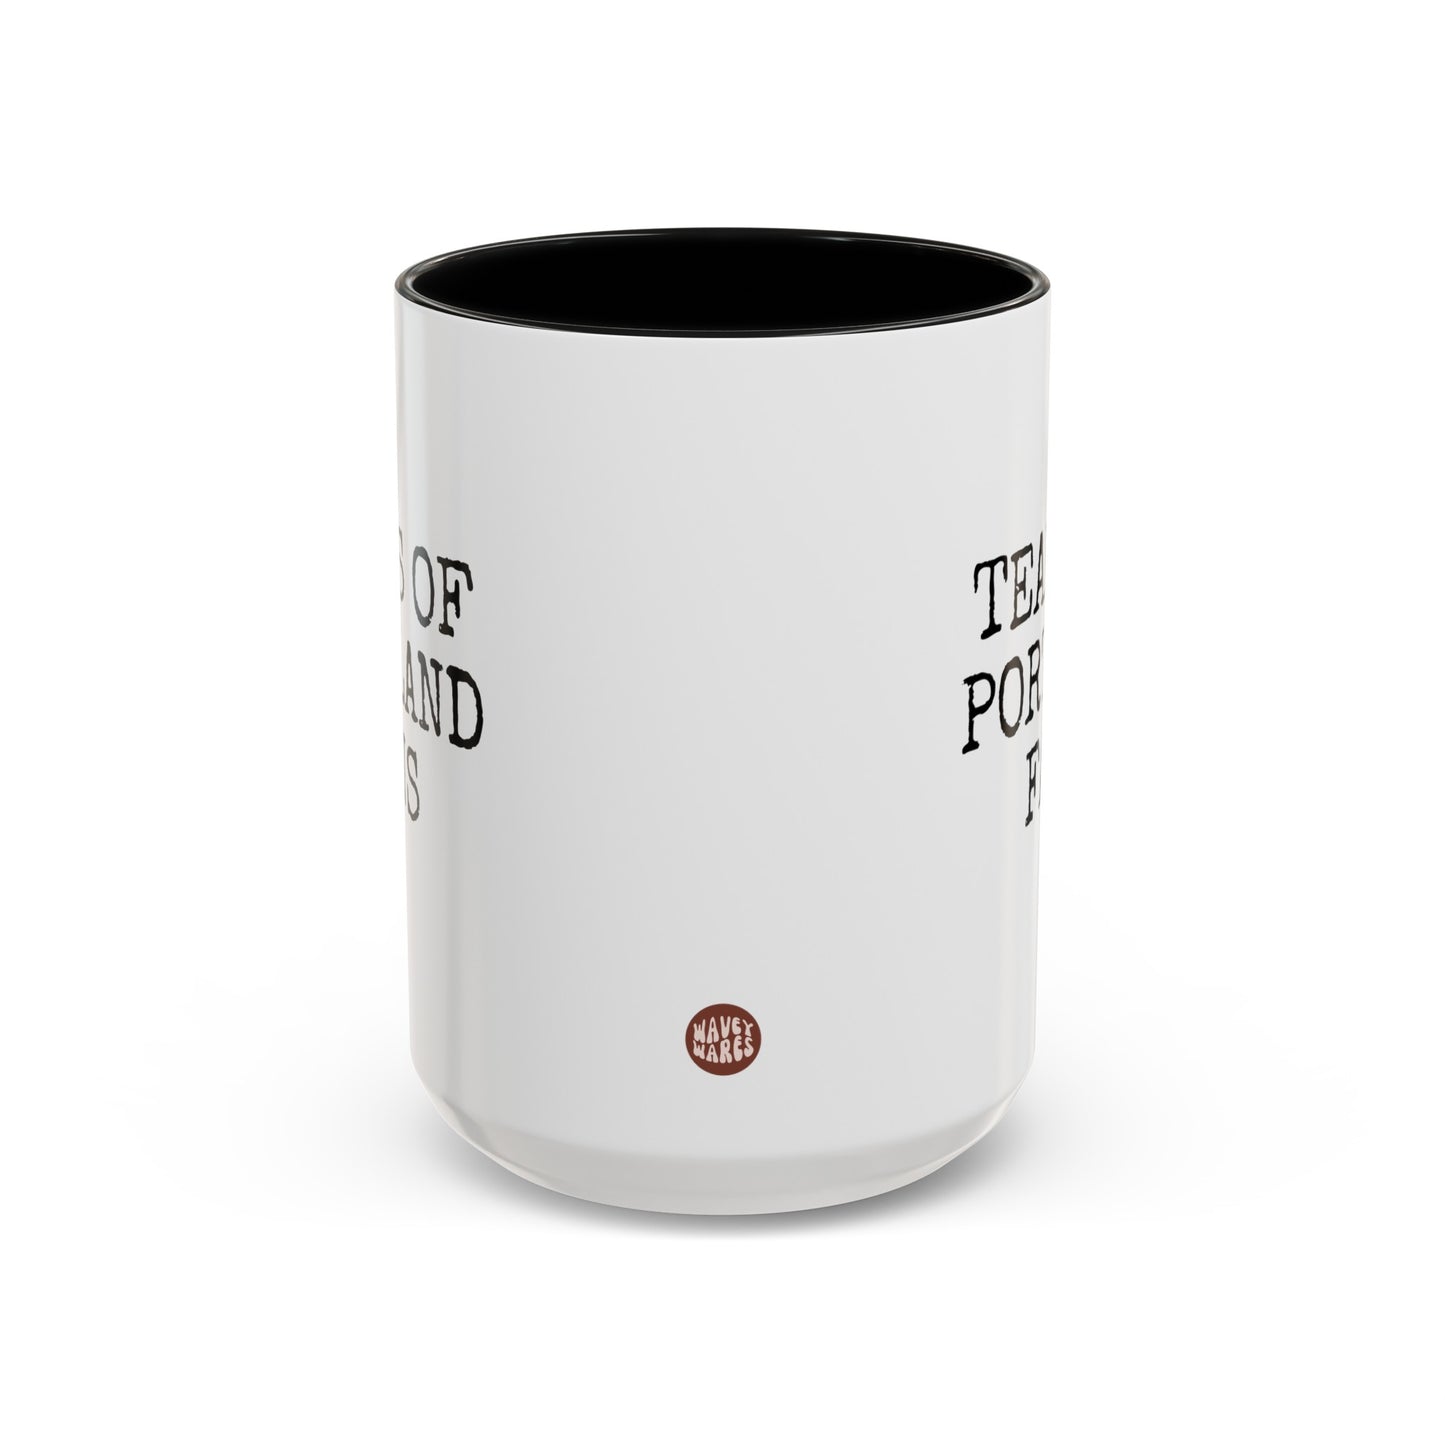 Tears Of Portland Fans 15oz white with black accent funny large coffee mug gift for football footie soccer cup futbol is life waveywares wavey wares wavywares wavy wares side